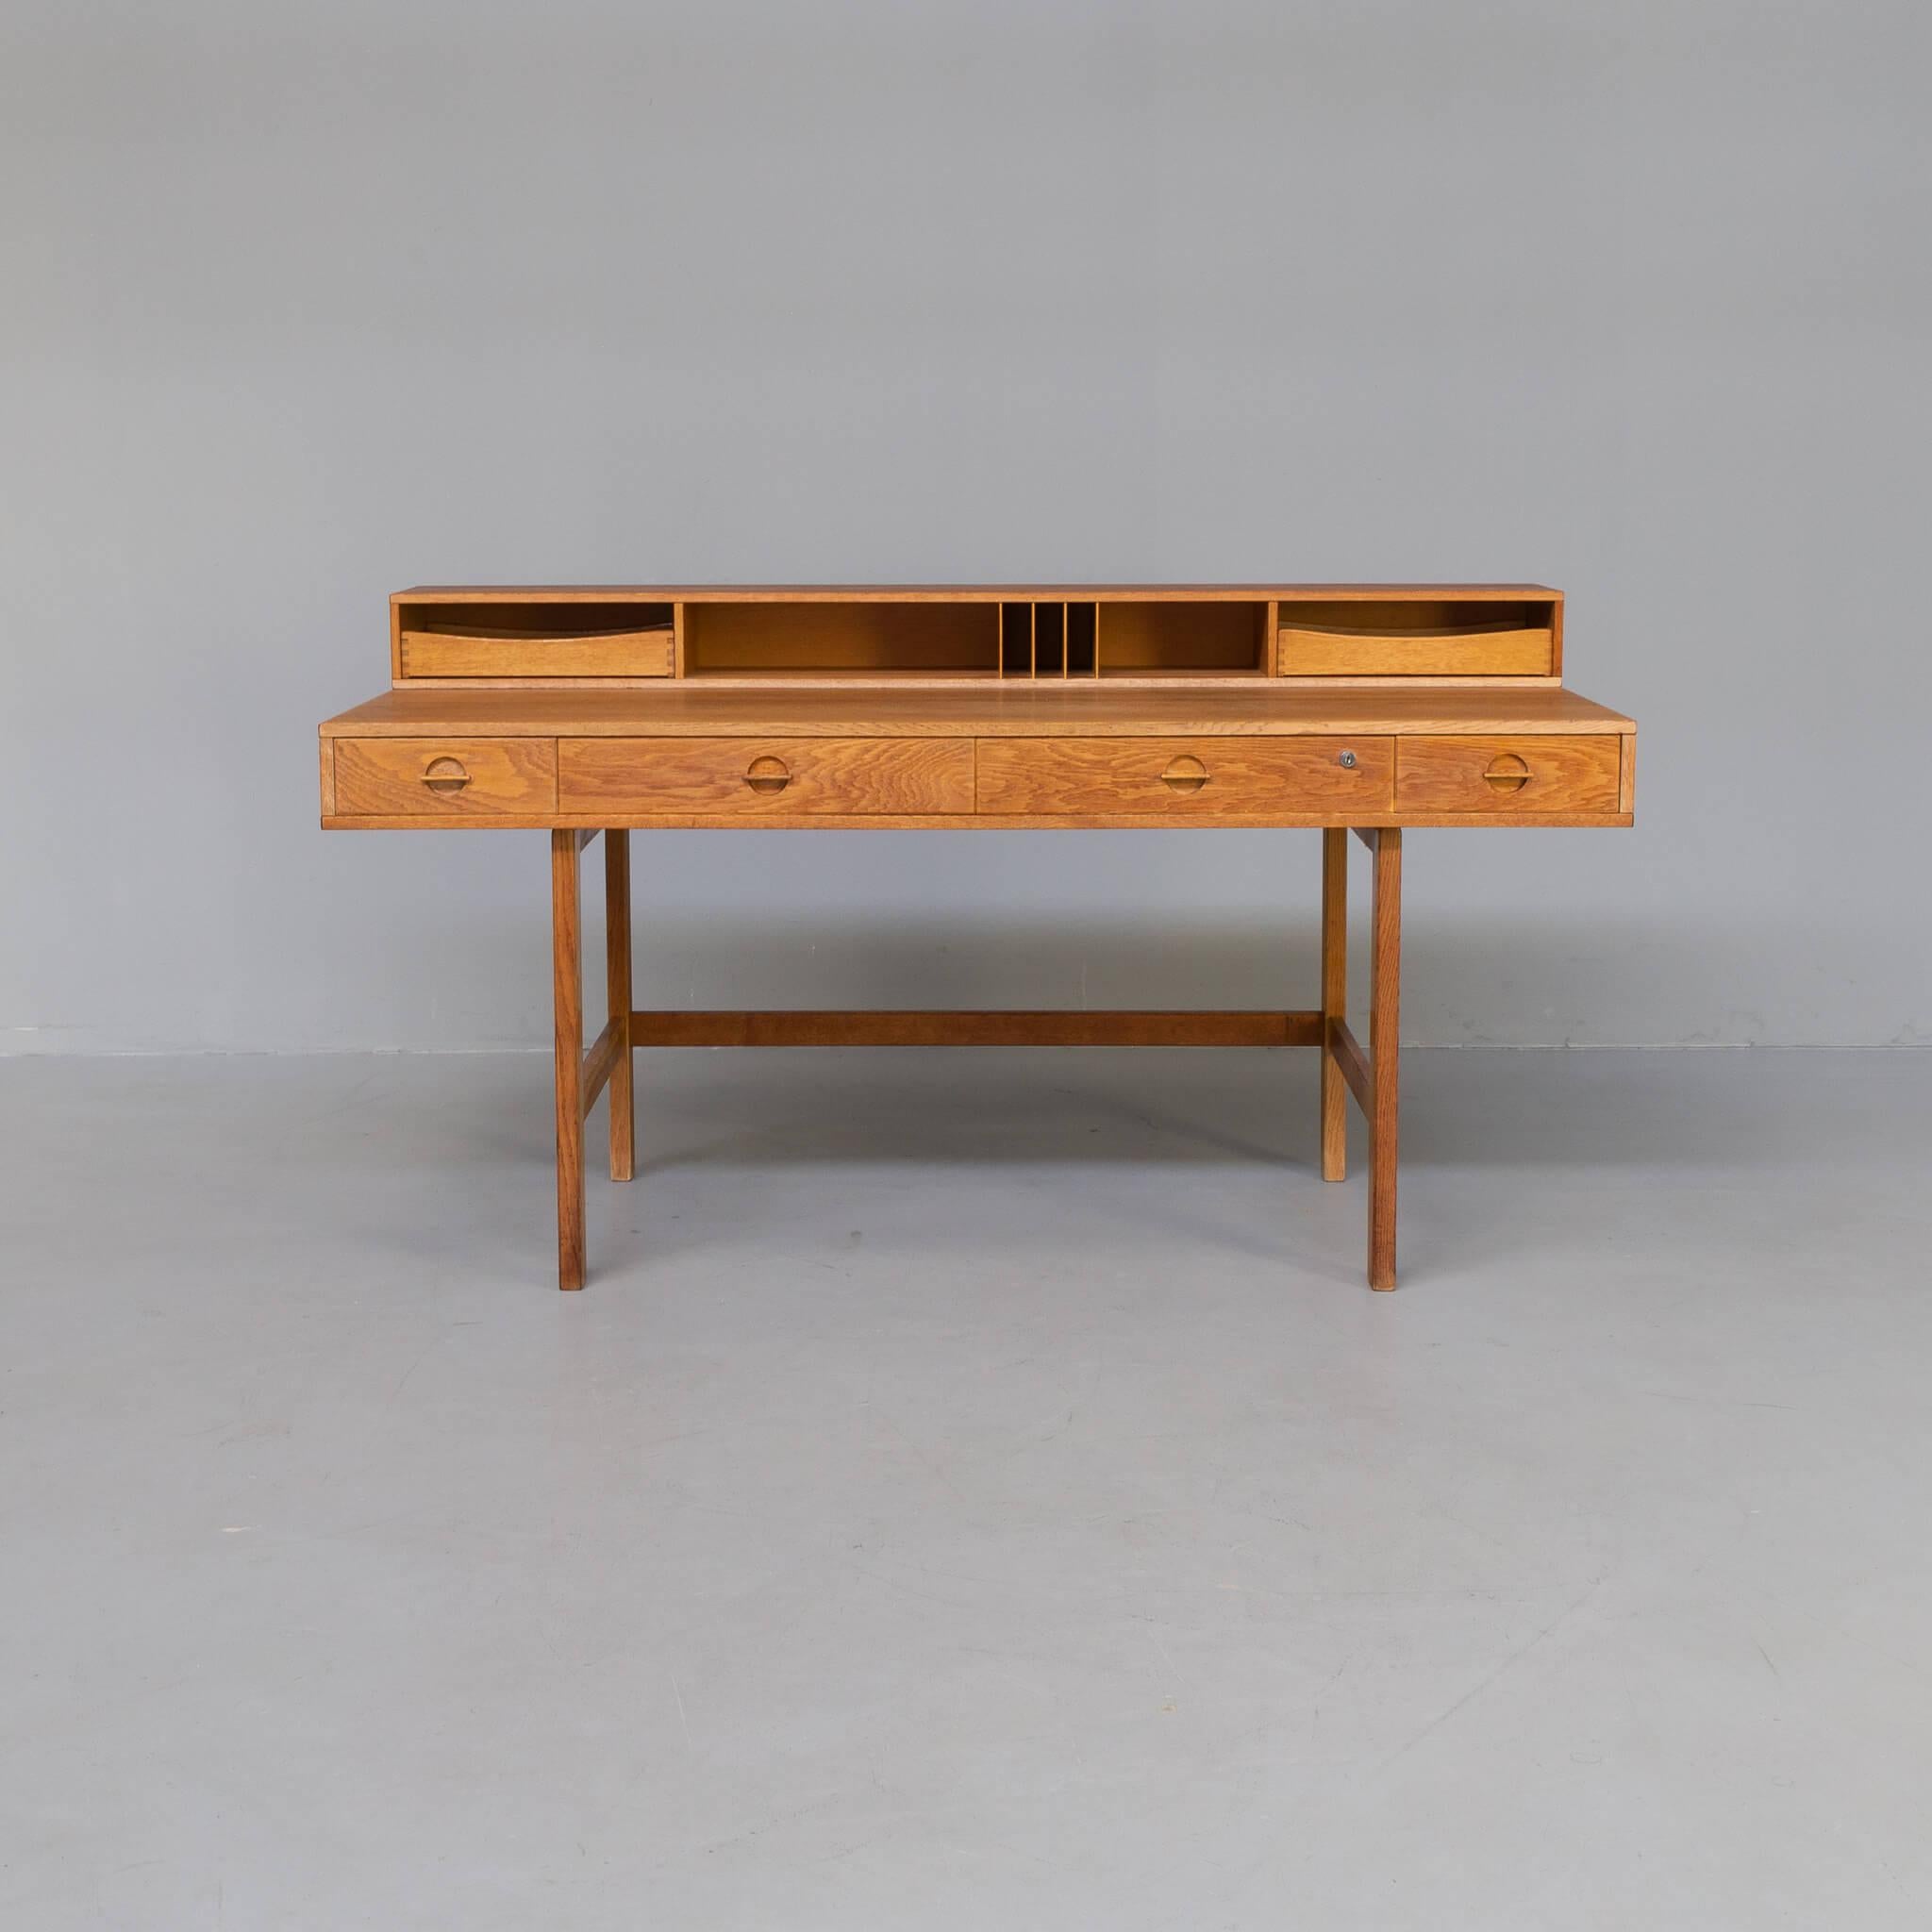 Jens Quistgaard designed the free-standing writing desk for Peter Løvig Nielsen in Denmark in the 1960s. It features a unique flip-top (foldable desk top unit) for added work space. There are several drawers and compartments. Jens Harald Quistgaard